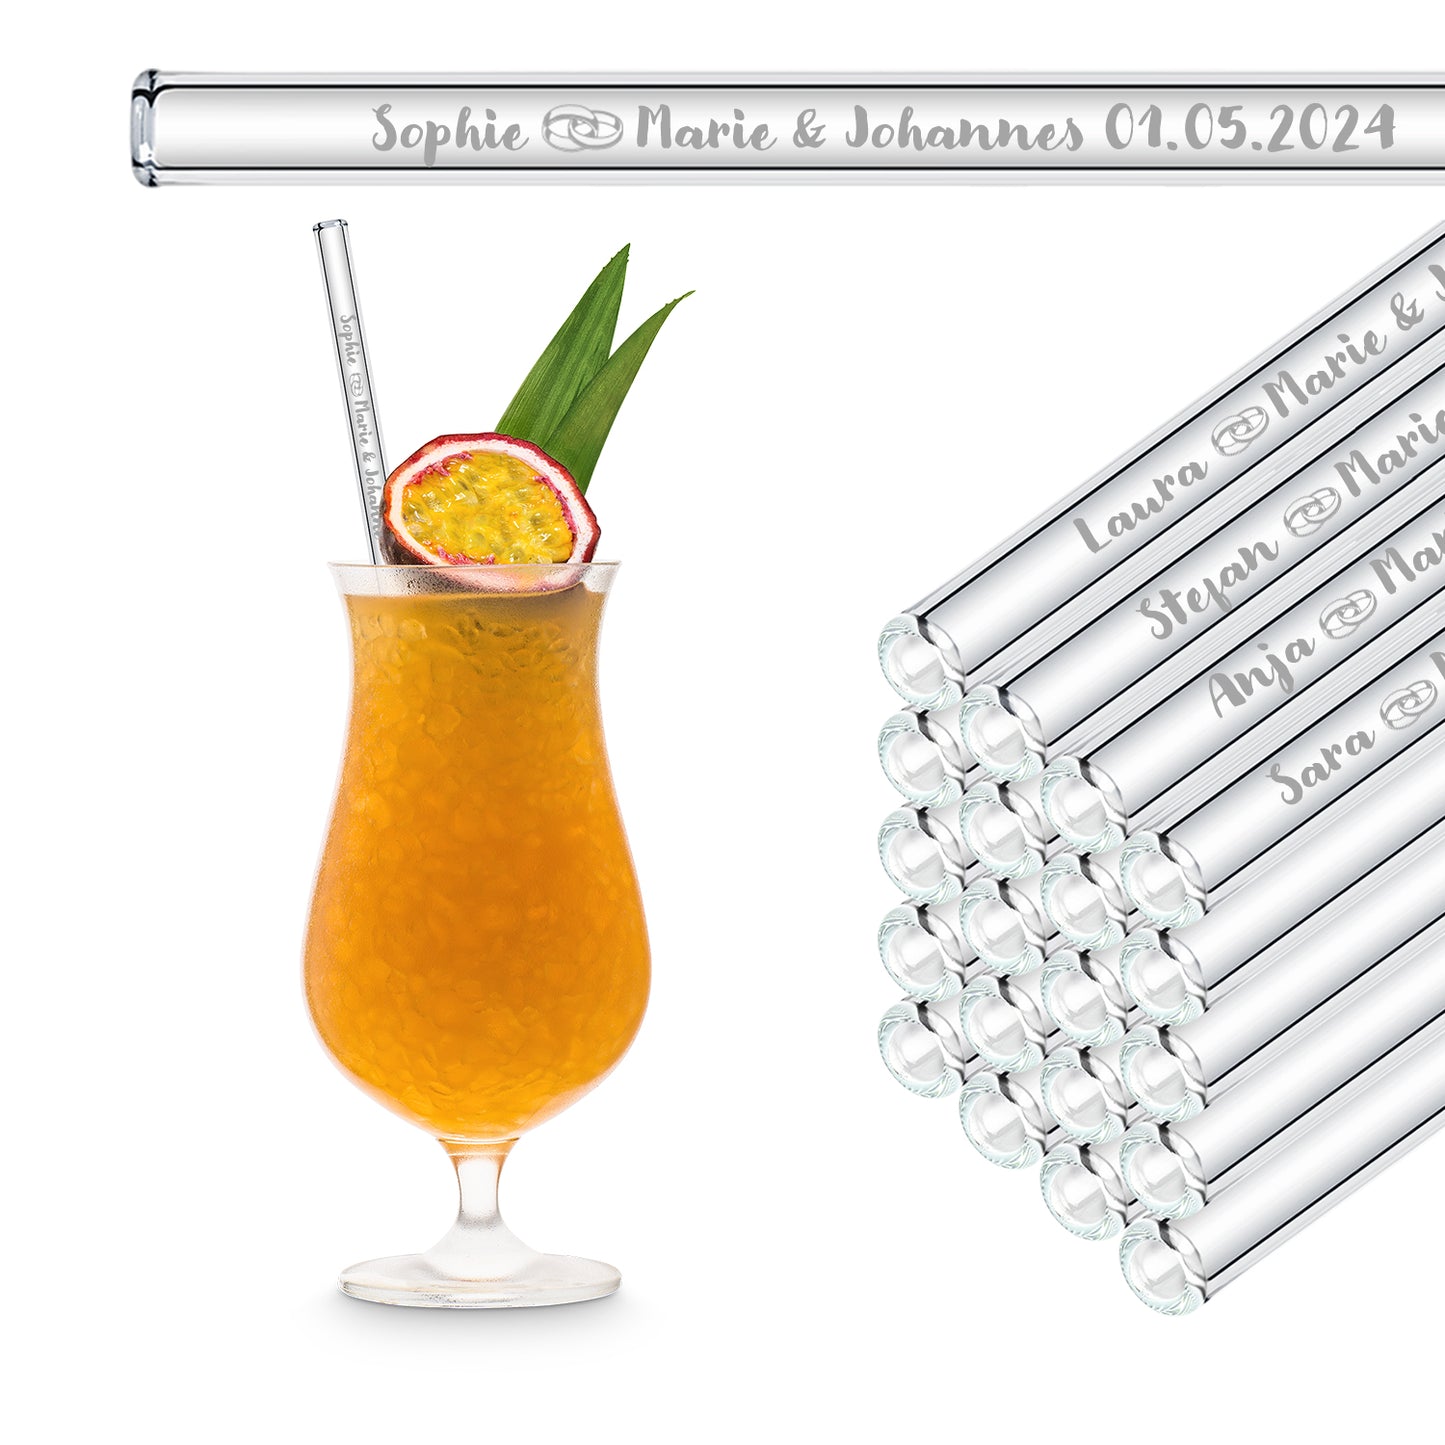 Personalized Wedding Favors - 50x Engraved Glass Straws with Guest Names